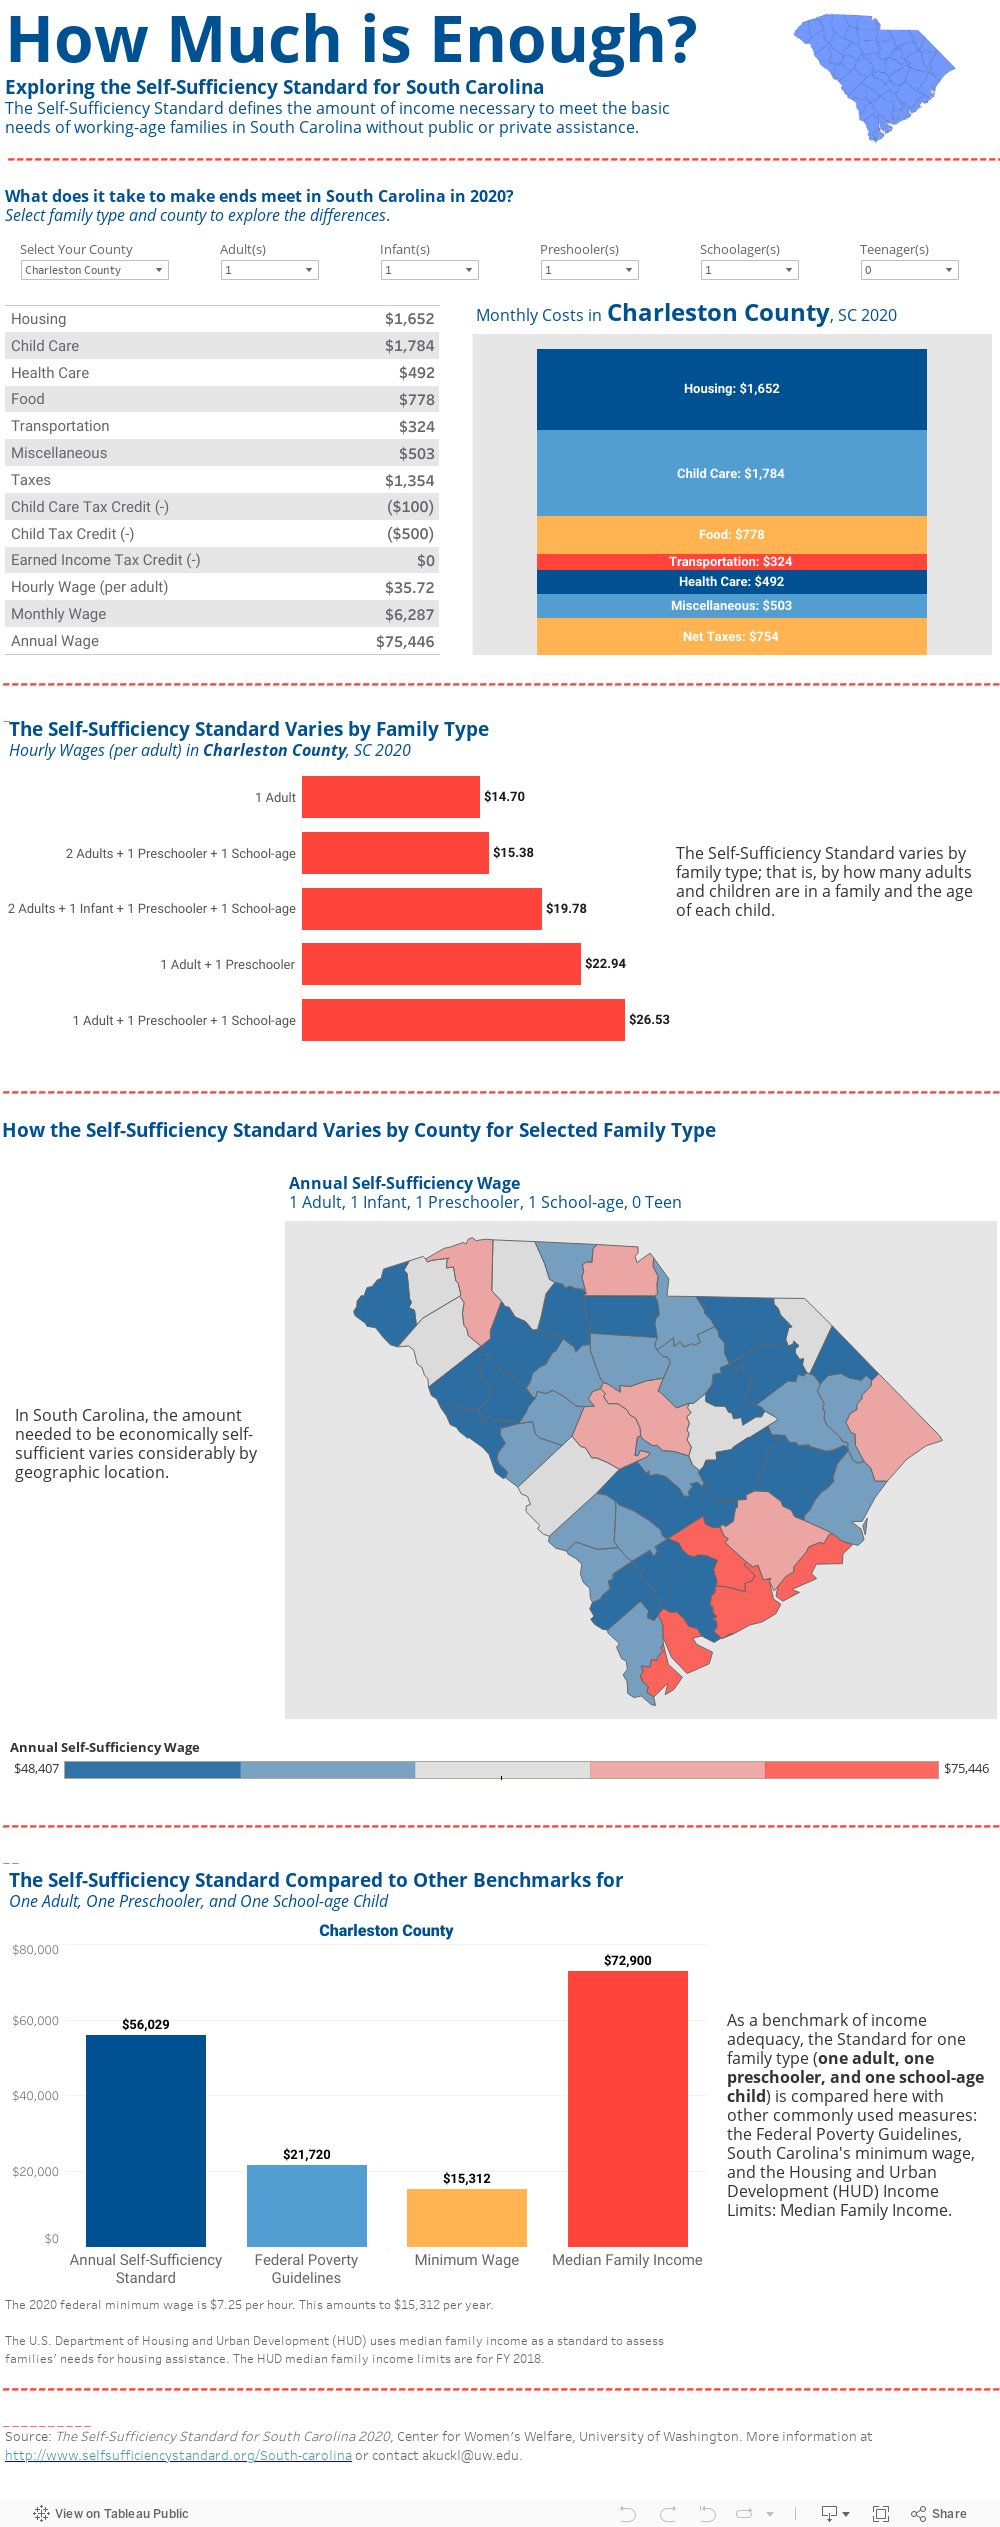 Exploring the Self-Sufficiency Standard for South Carolina